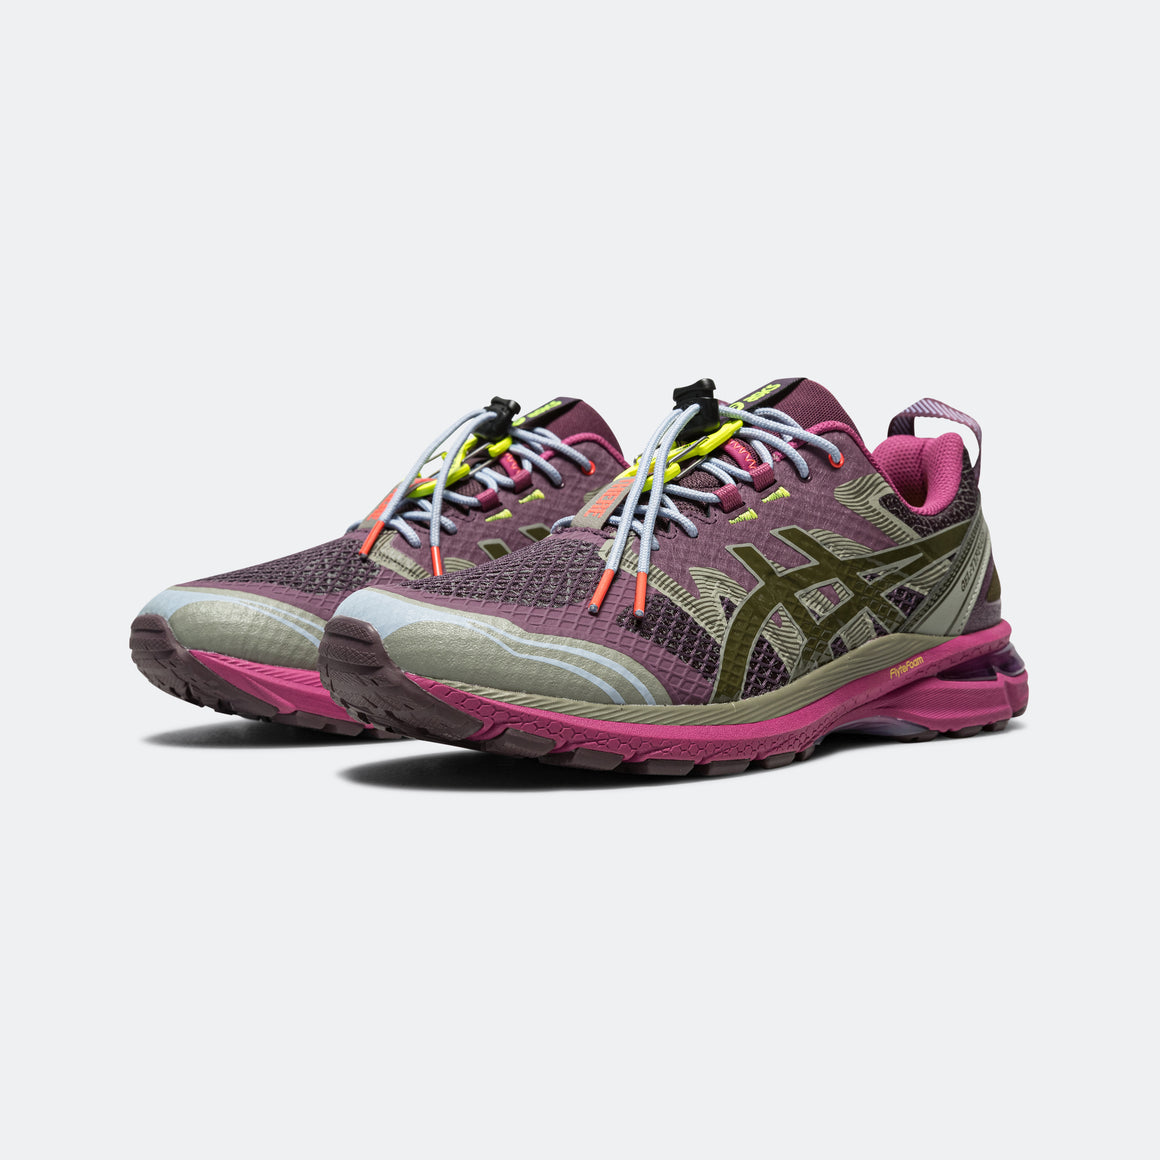 Asics - GEL-Terrain x UP THERE - Purple/Lavendar - UP THERE